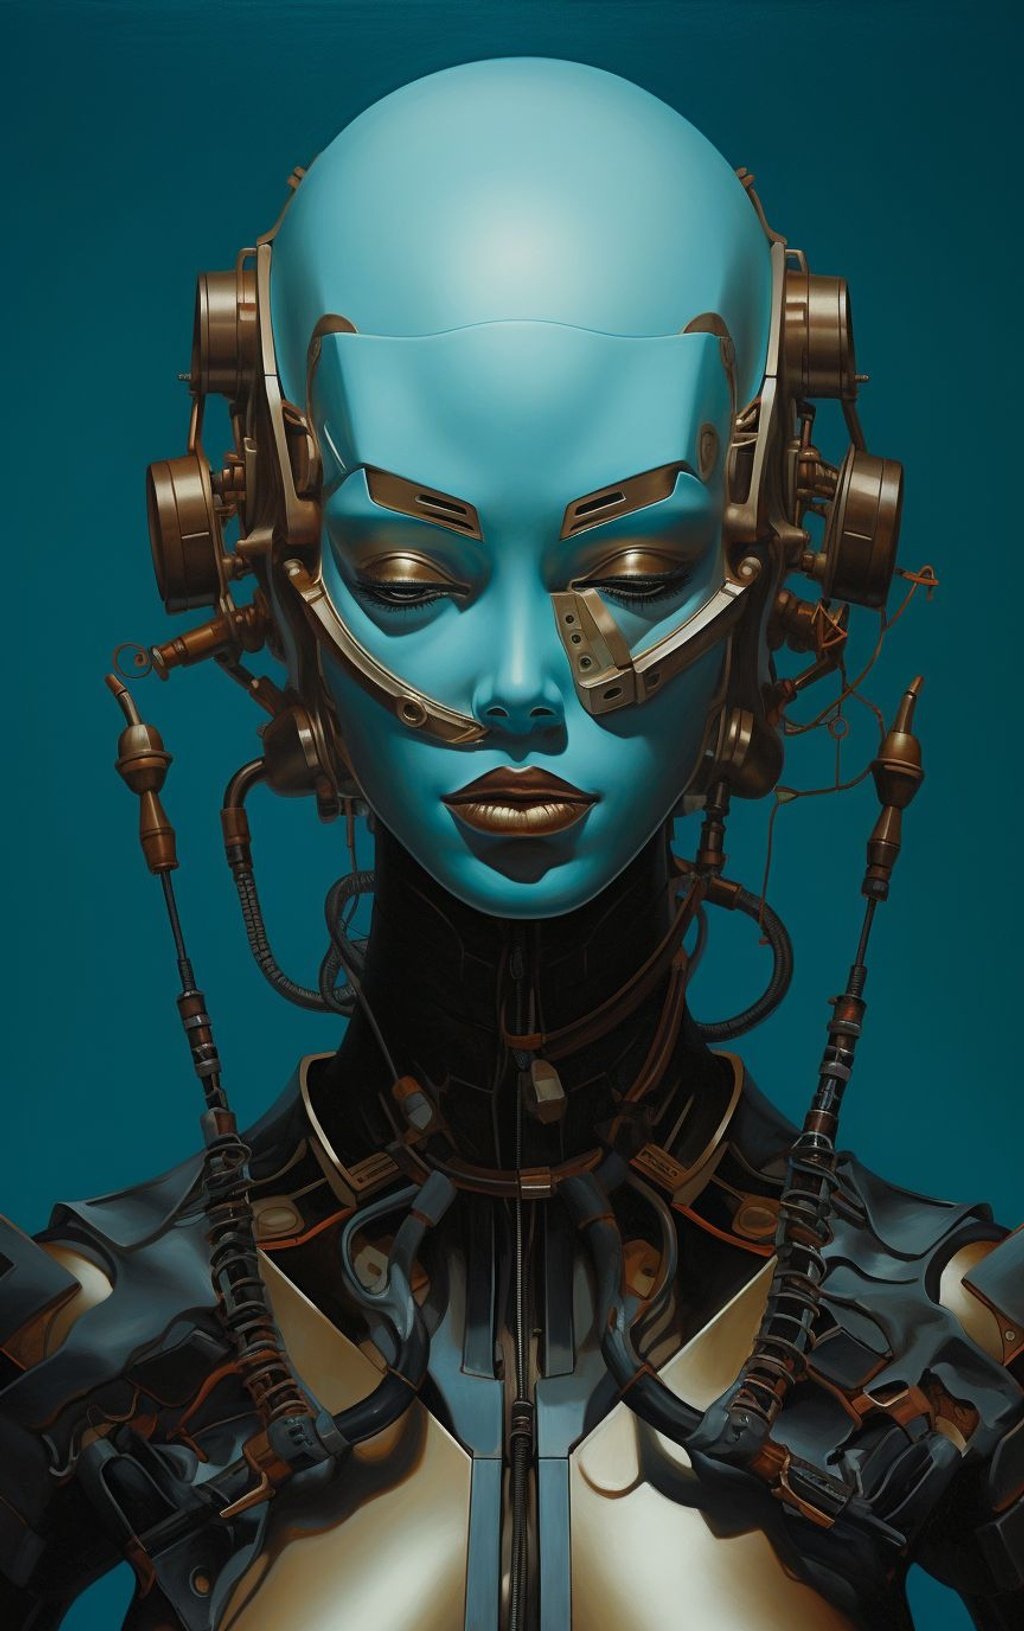 Prompt: a woman in robots and gear with a sword, in the style of dark cyan and bronze, surreal cyberpunk iconography, hyperrealistic murals, indian pop culture, ritualistic masks, 3d, vibrant illustrations